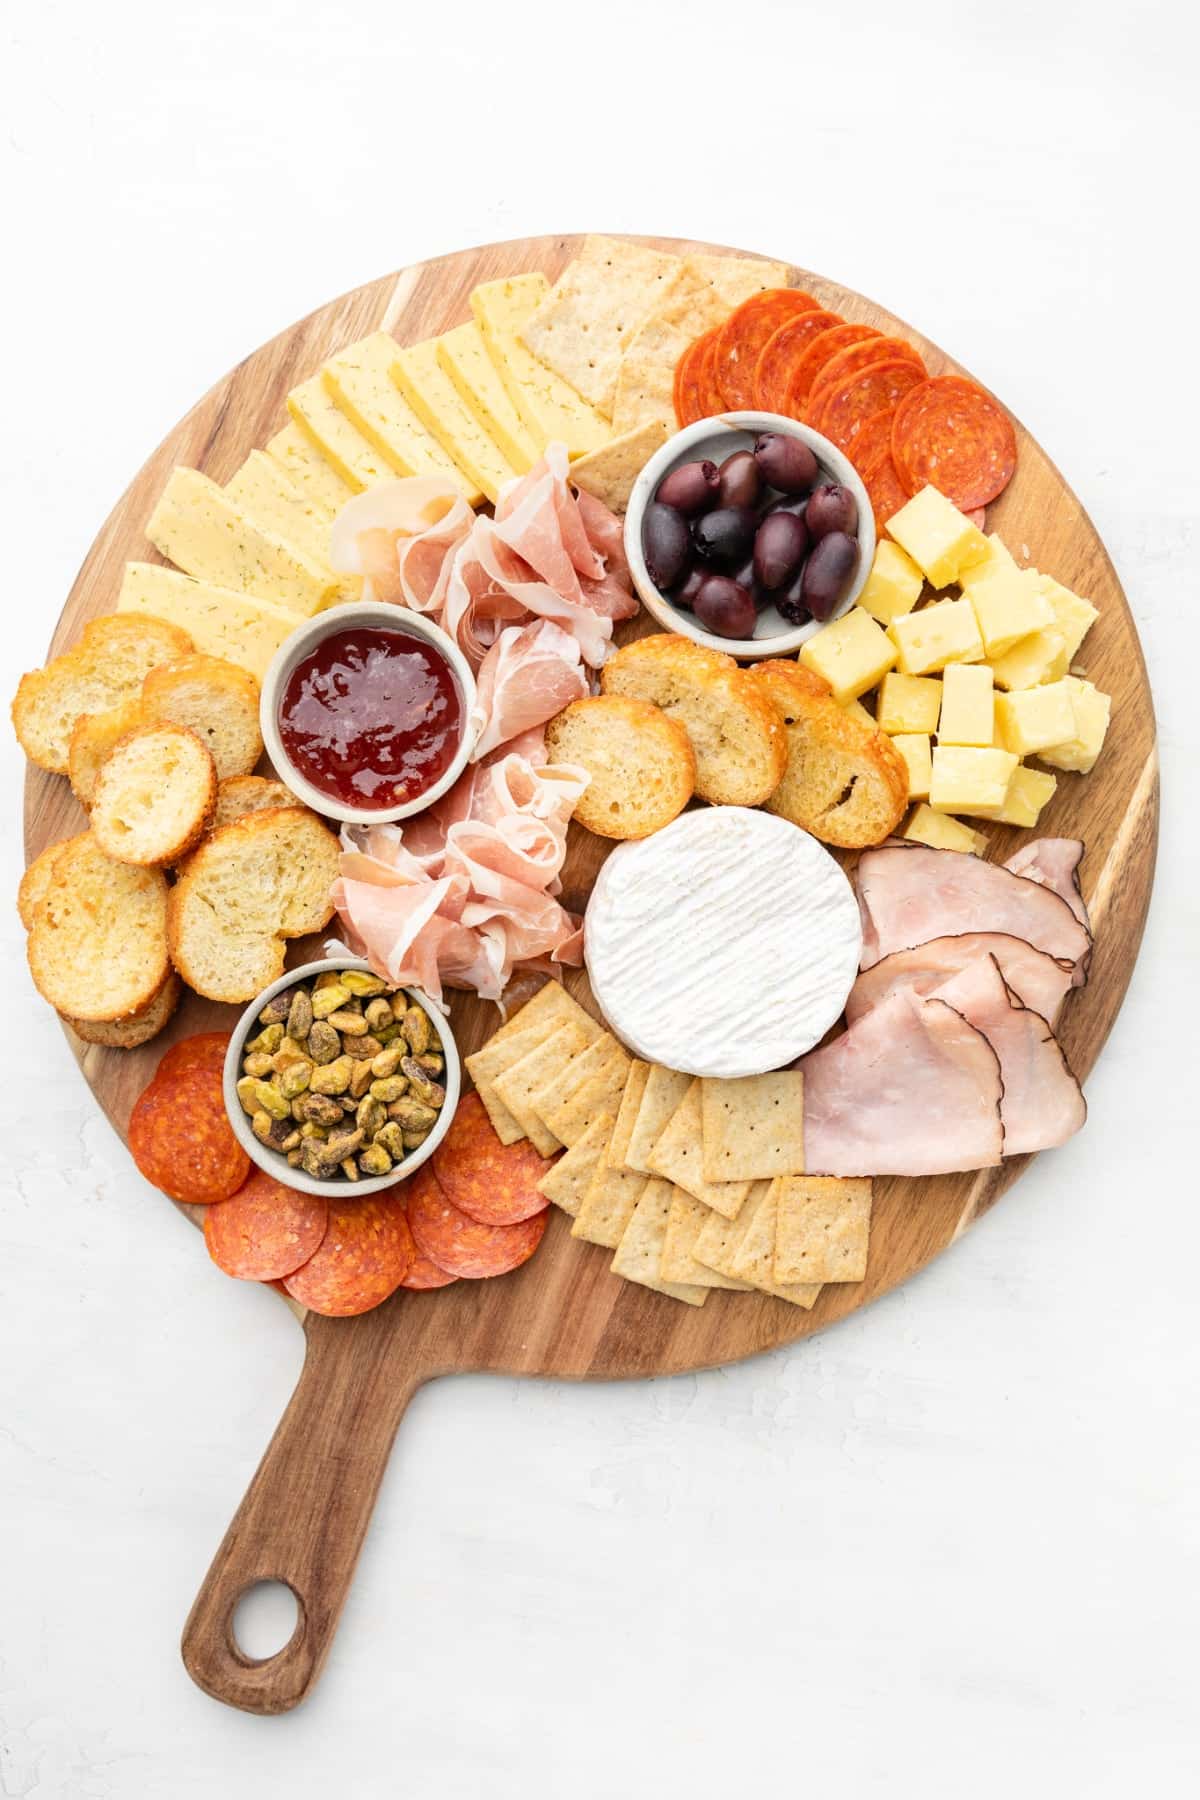 Building a small charcuterie board with accents, cheese, meats, and crackers.